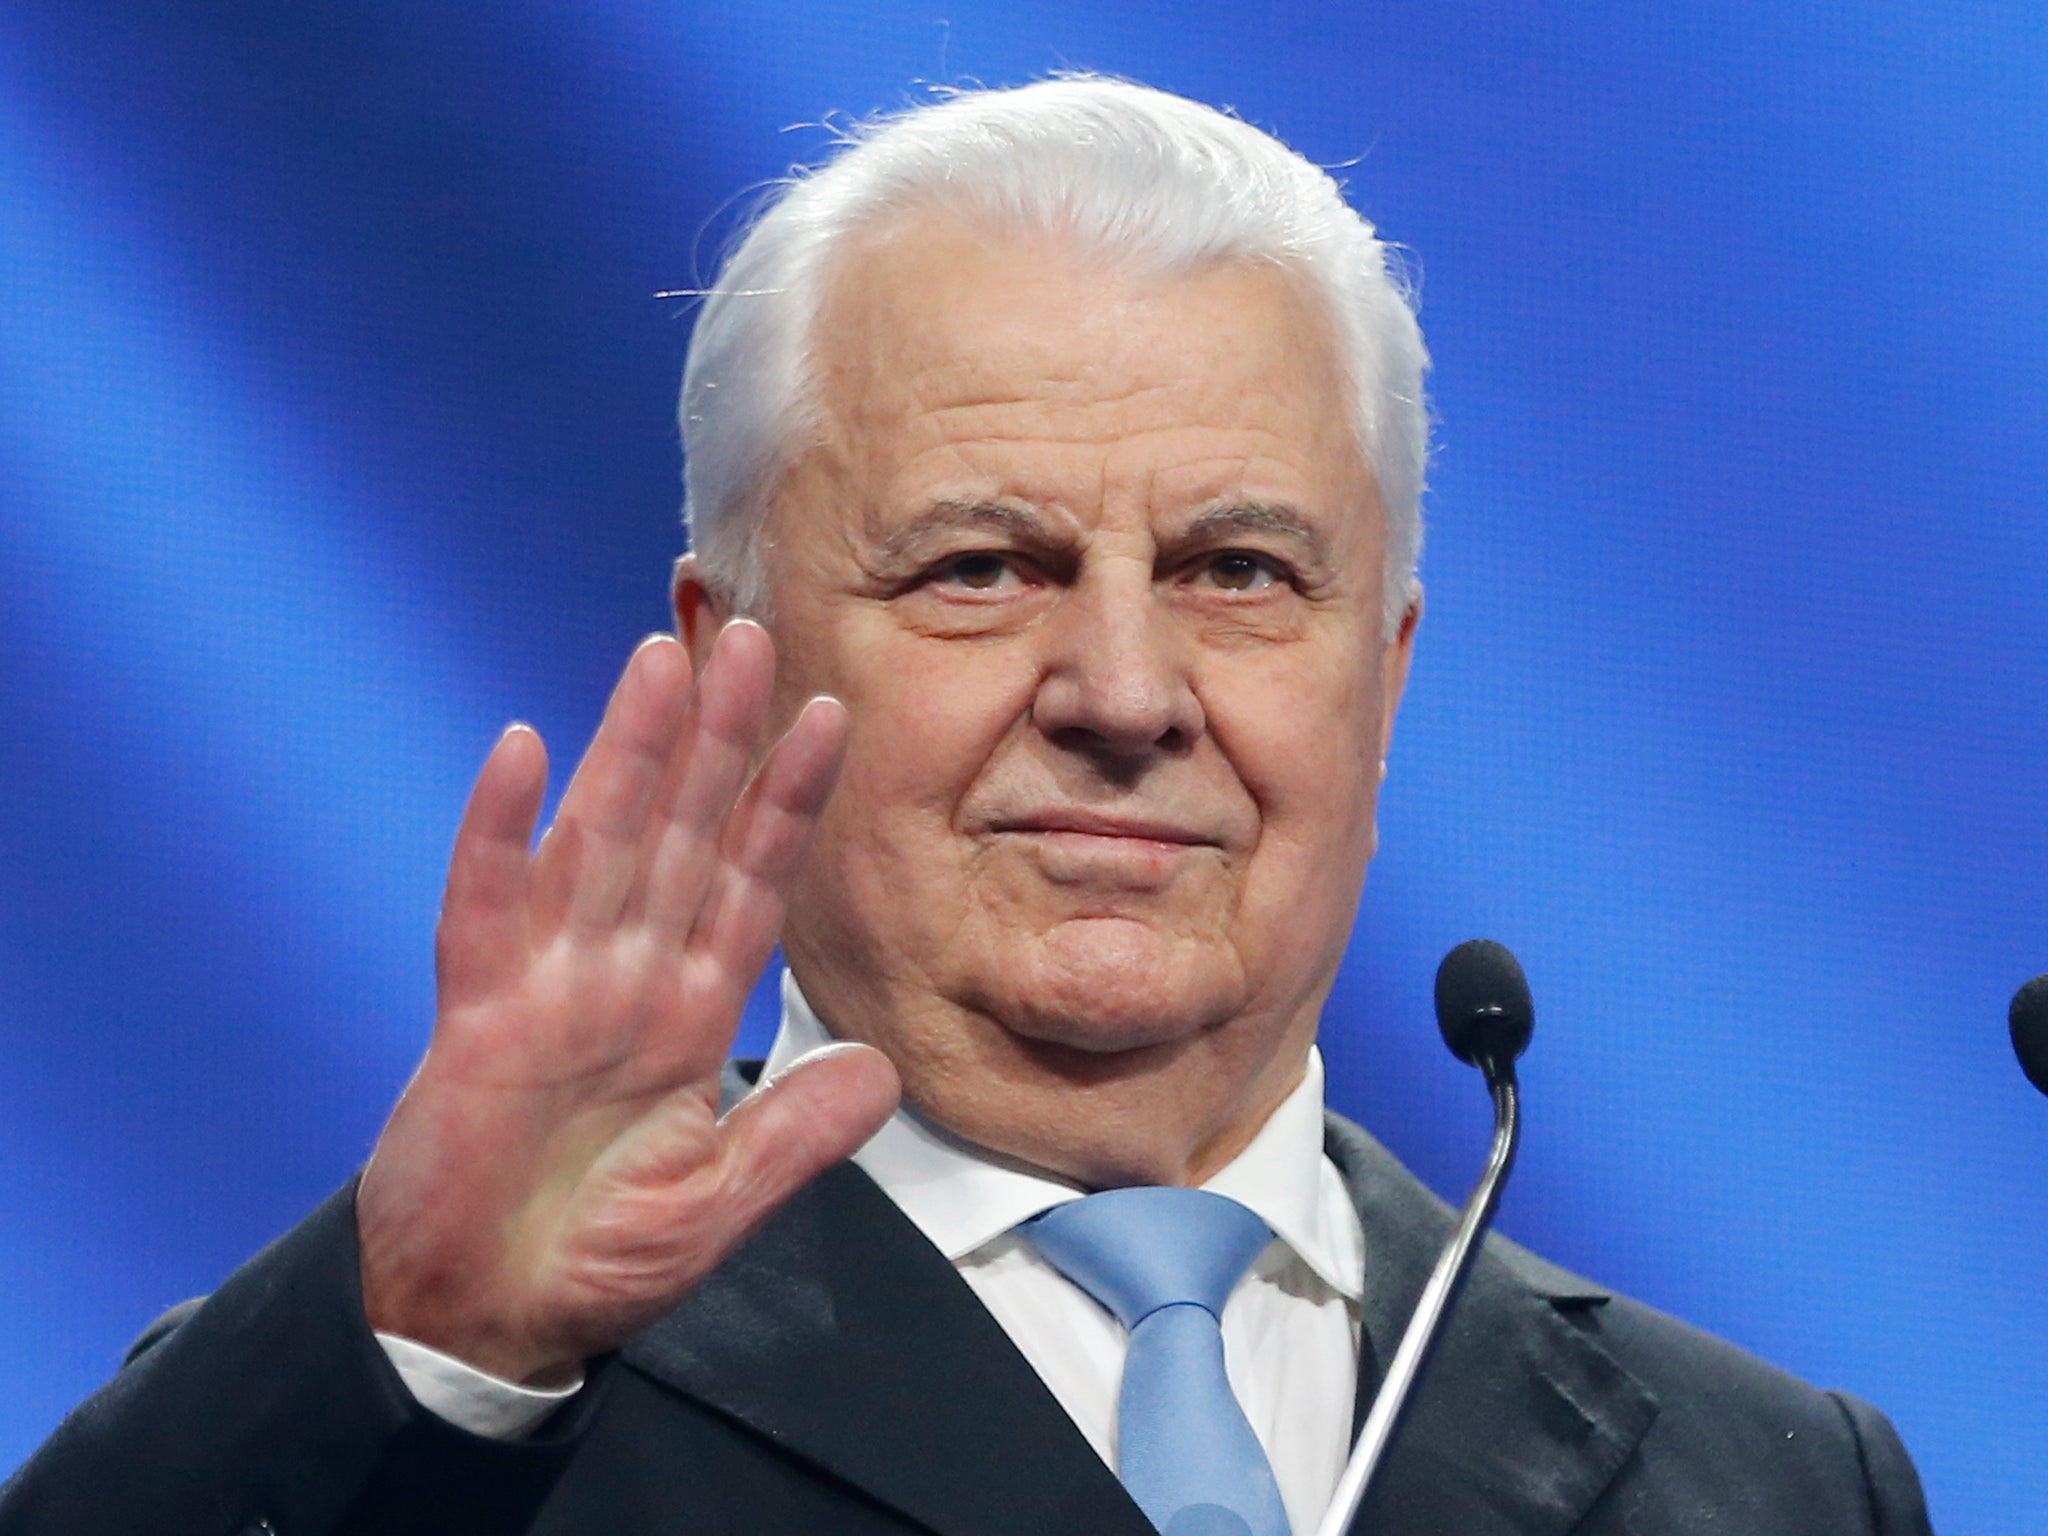 Although he was initially a key figure in the Communist political machine, Kravchuk eventually evolved into a forceful advocate for independence